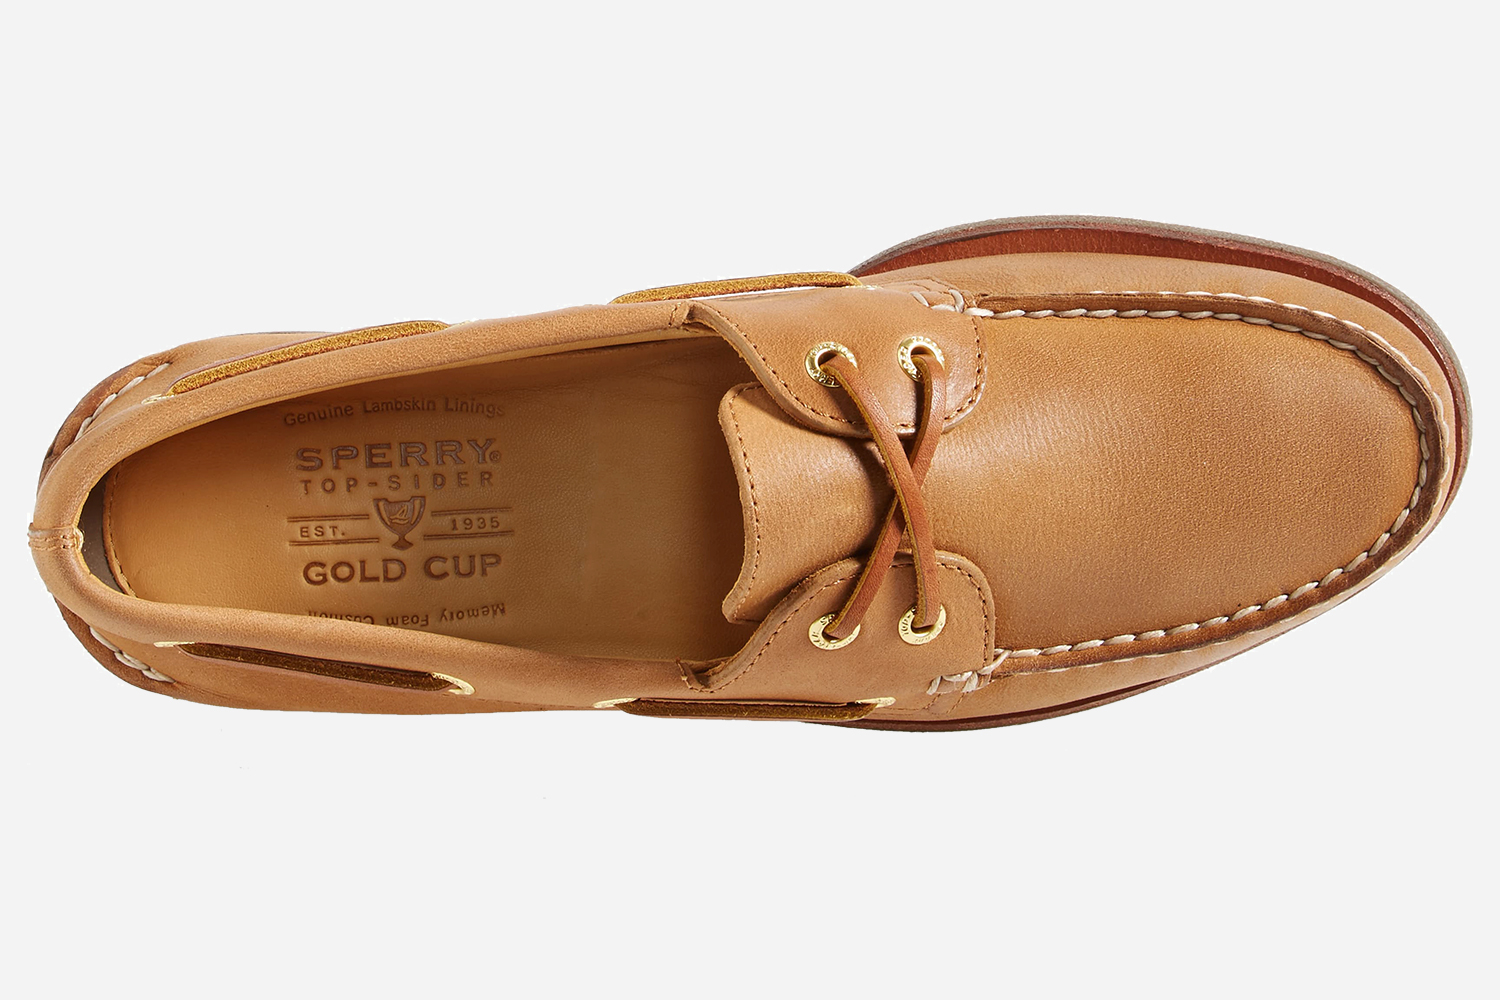 Sperry Gold Cup Authentic Original Boat Shoes Are $50 Off at Nordstrom